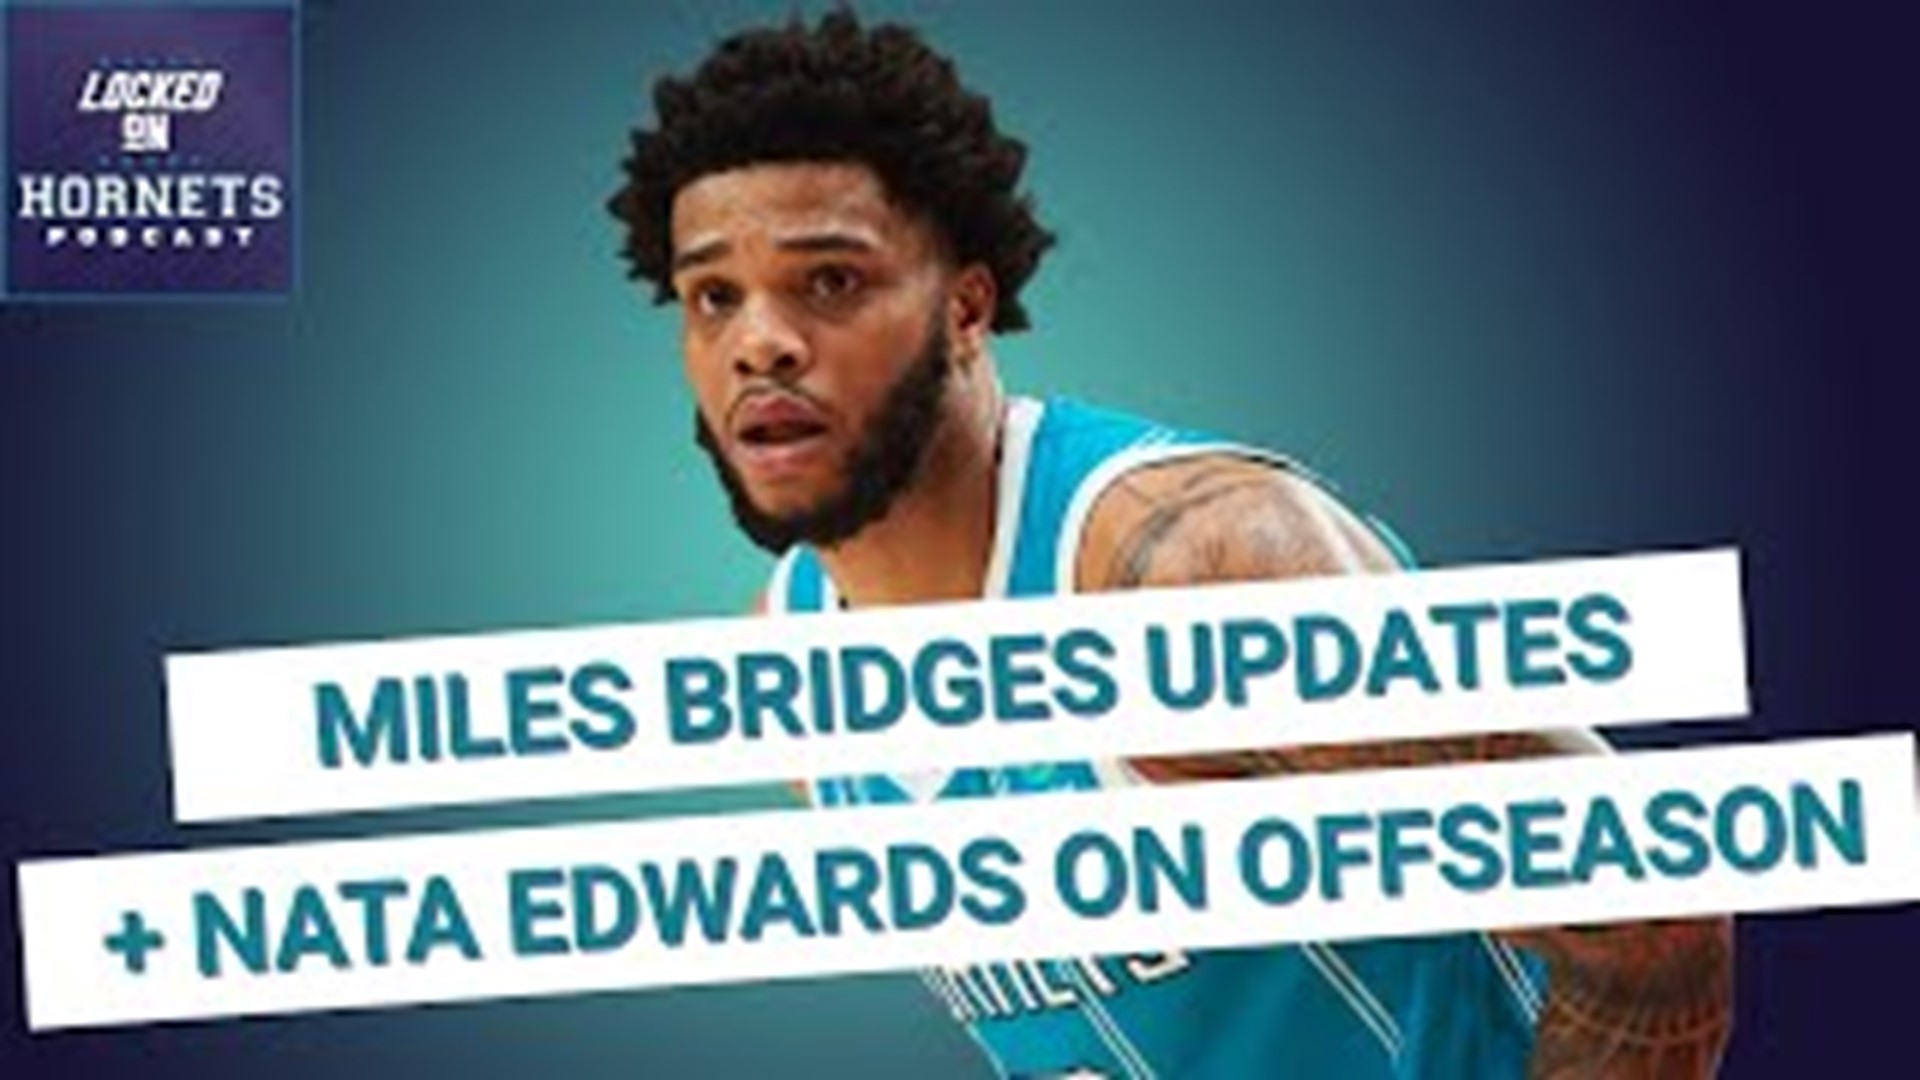 An update on the Miles Bridges case. Plus, Nata Edwards joins us and brings a positive outlook on the Hornets offseason. That and more on Locked On Hornets!